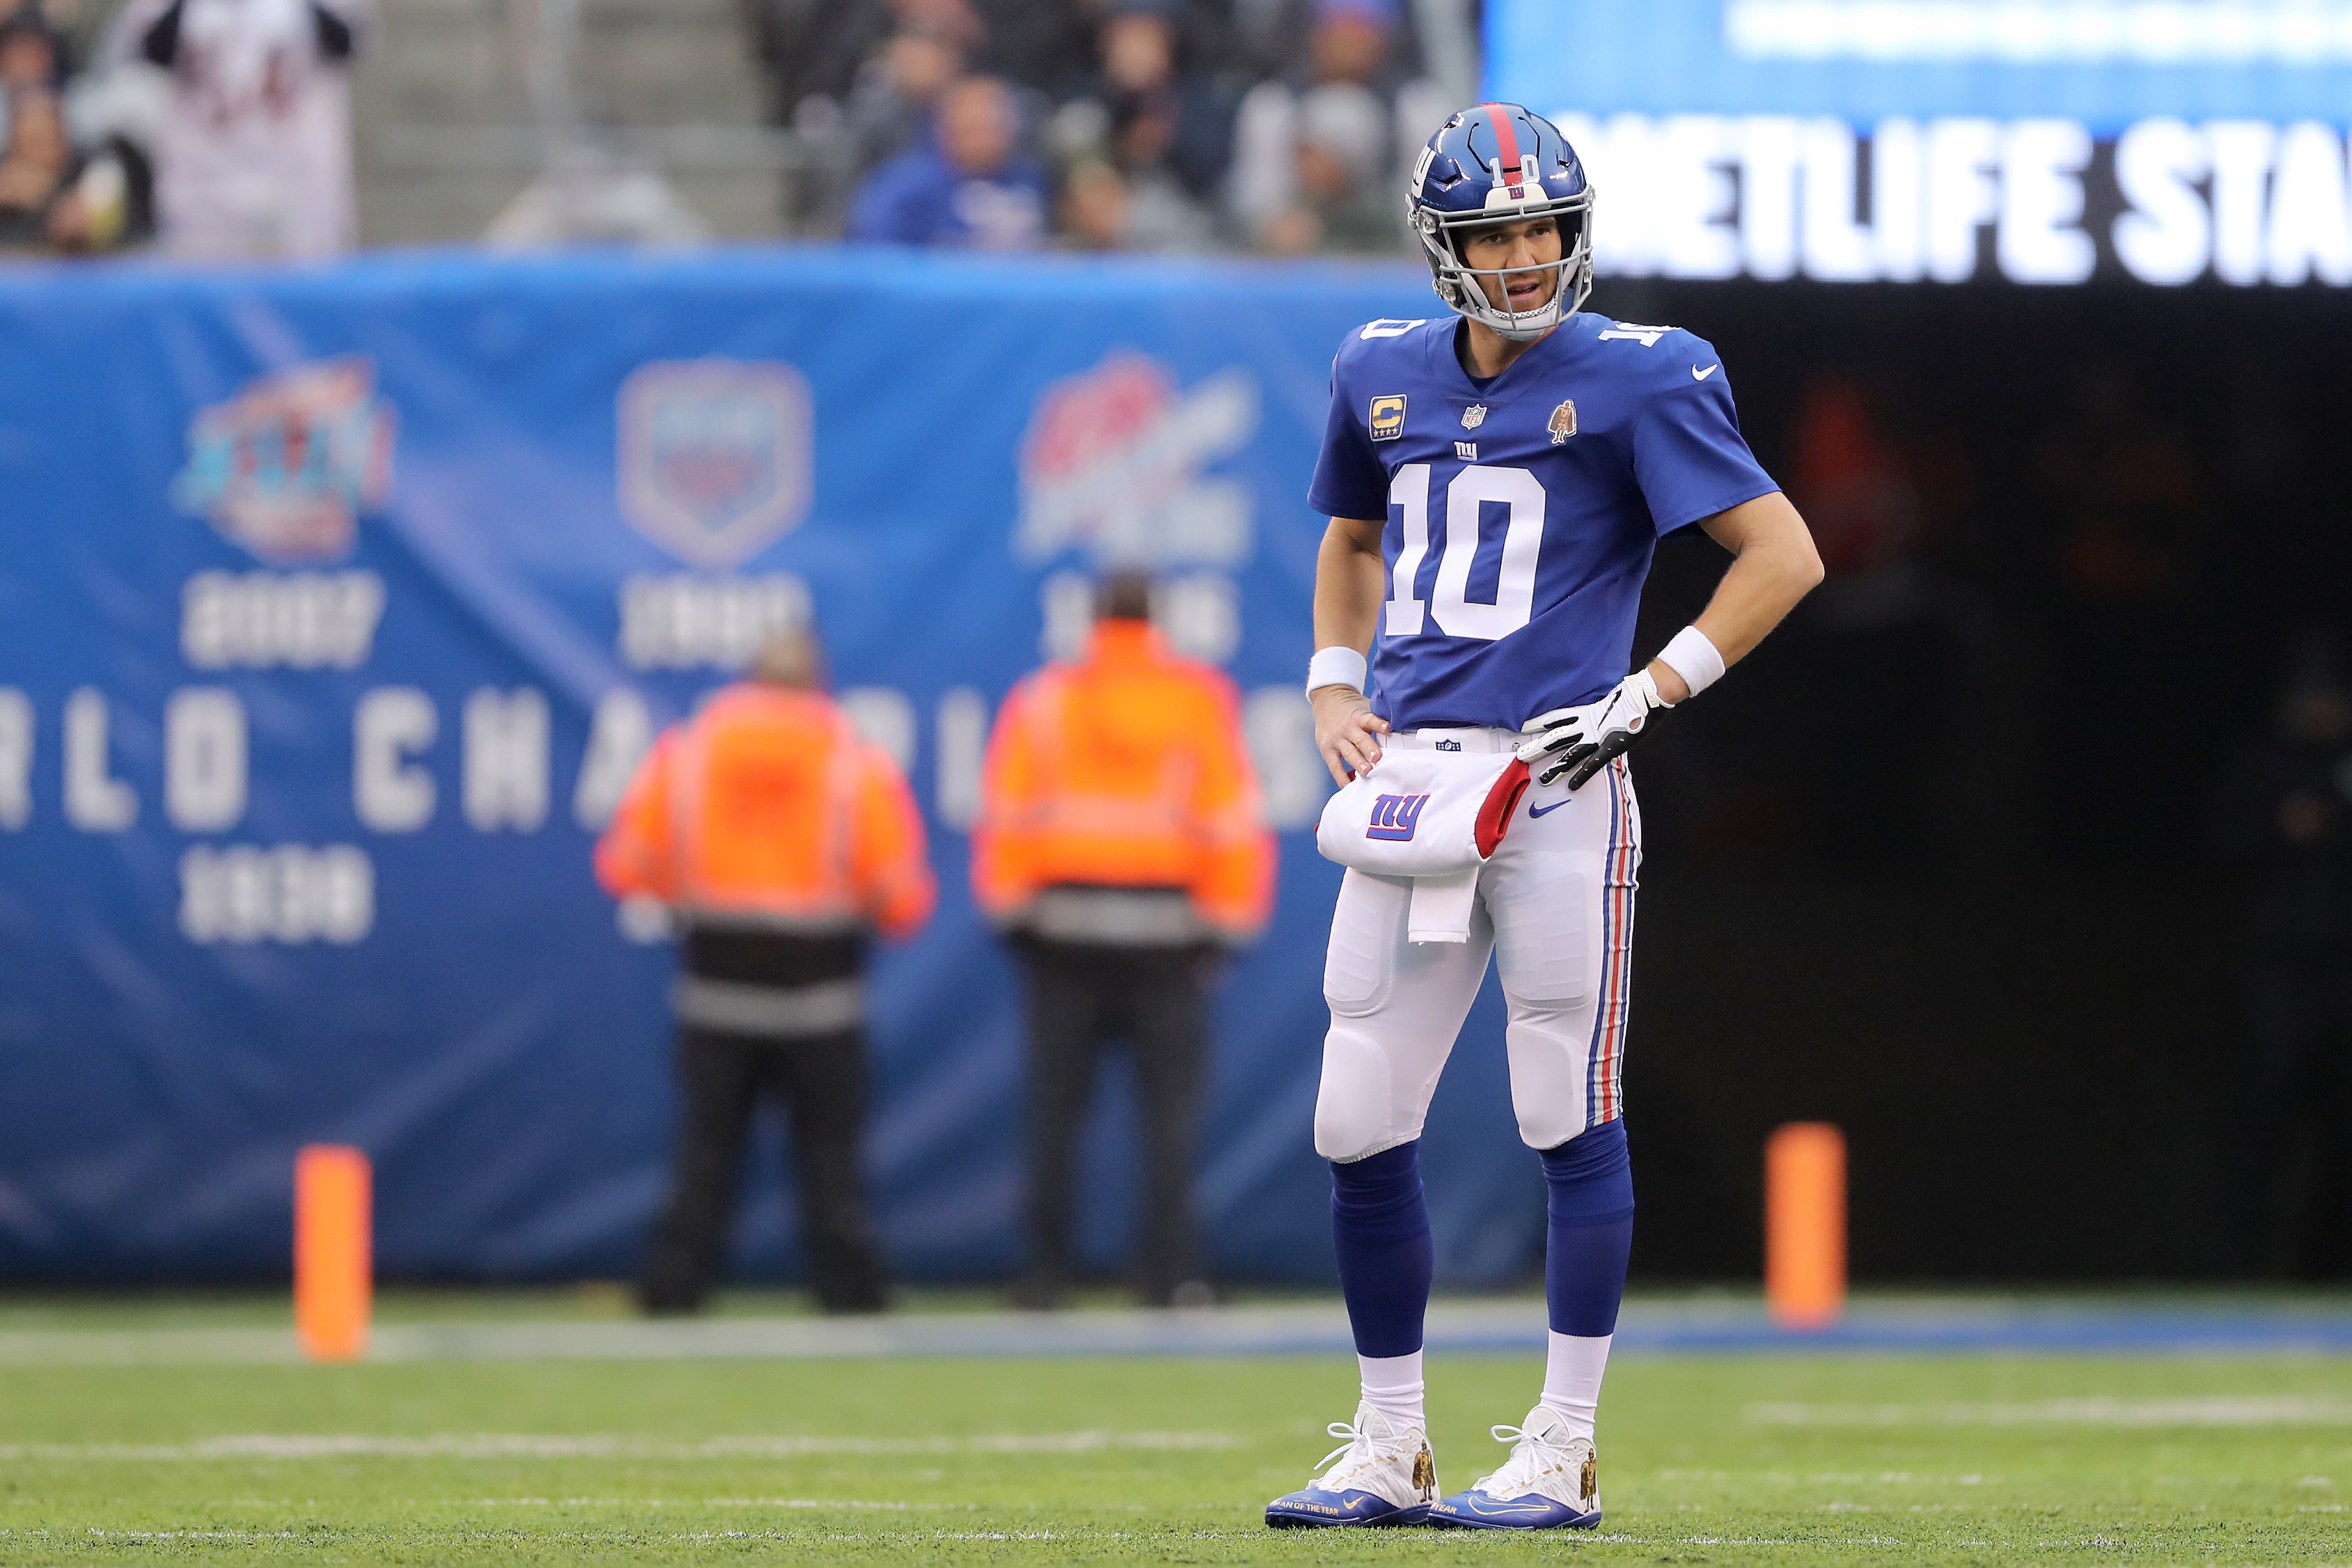 Chicago Bears: No fans, Eli Manning is not the answer